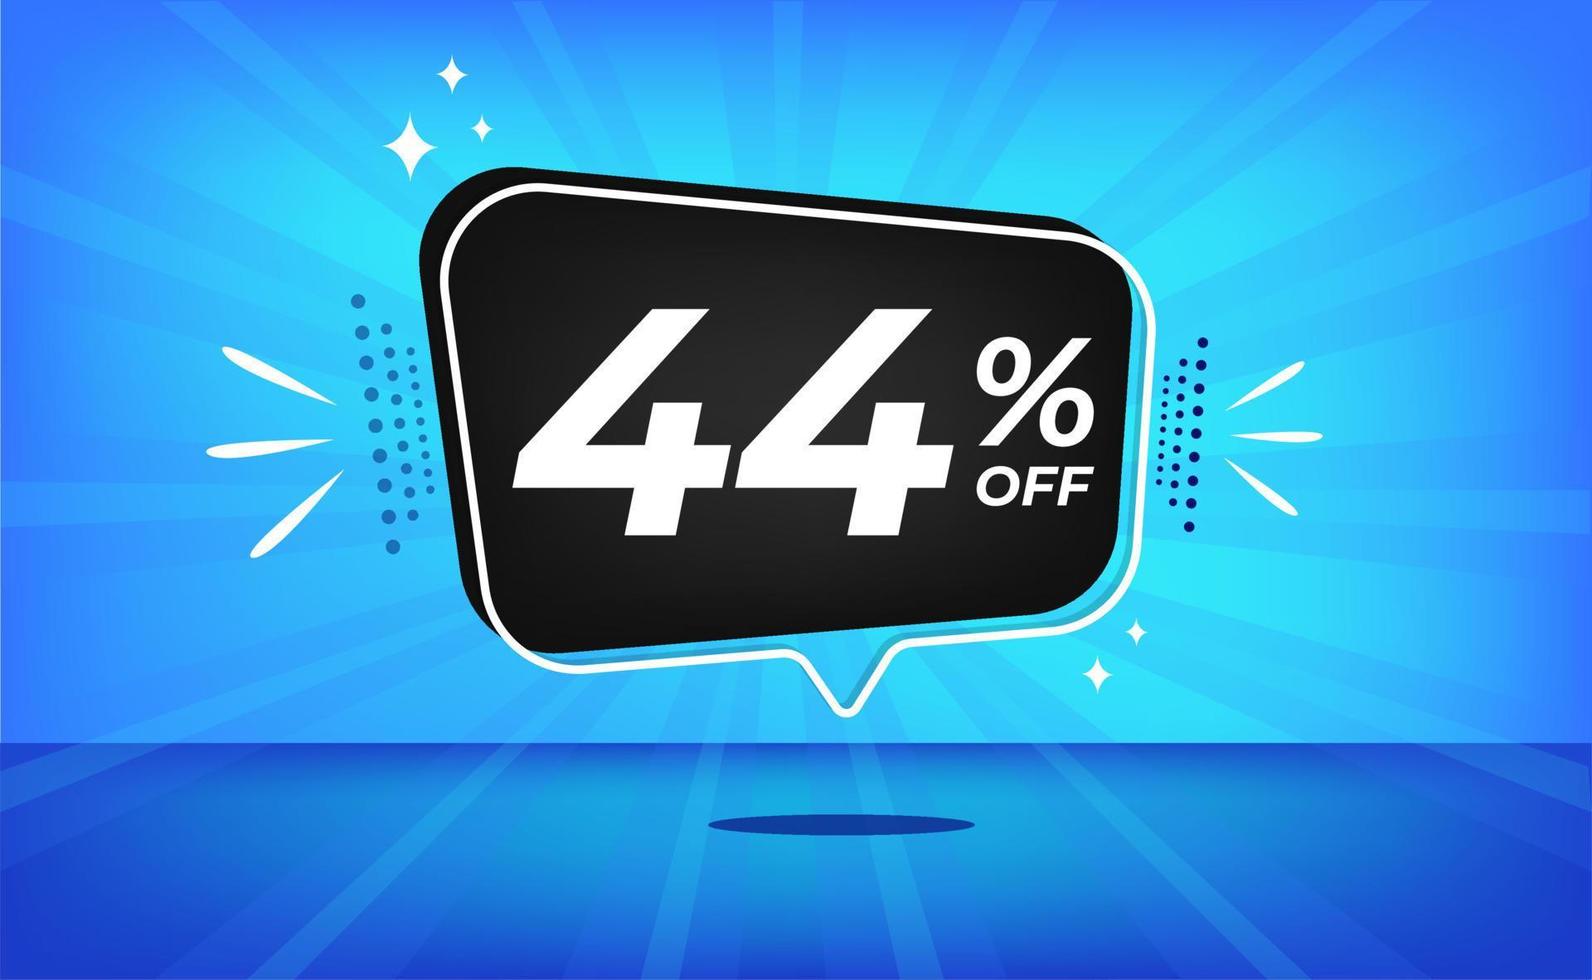 44 percent off. Blue banner with forty-four percent discount on a black balloon for mega big sales. vector